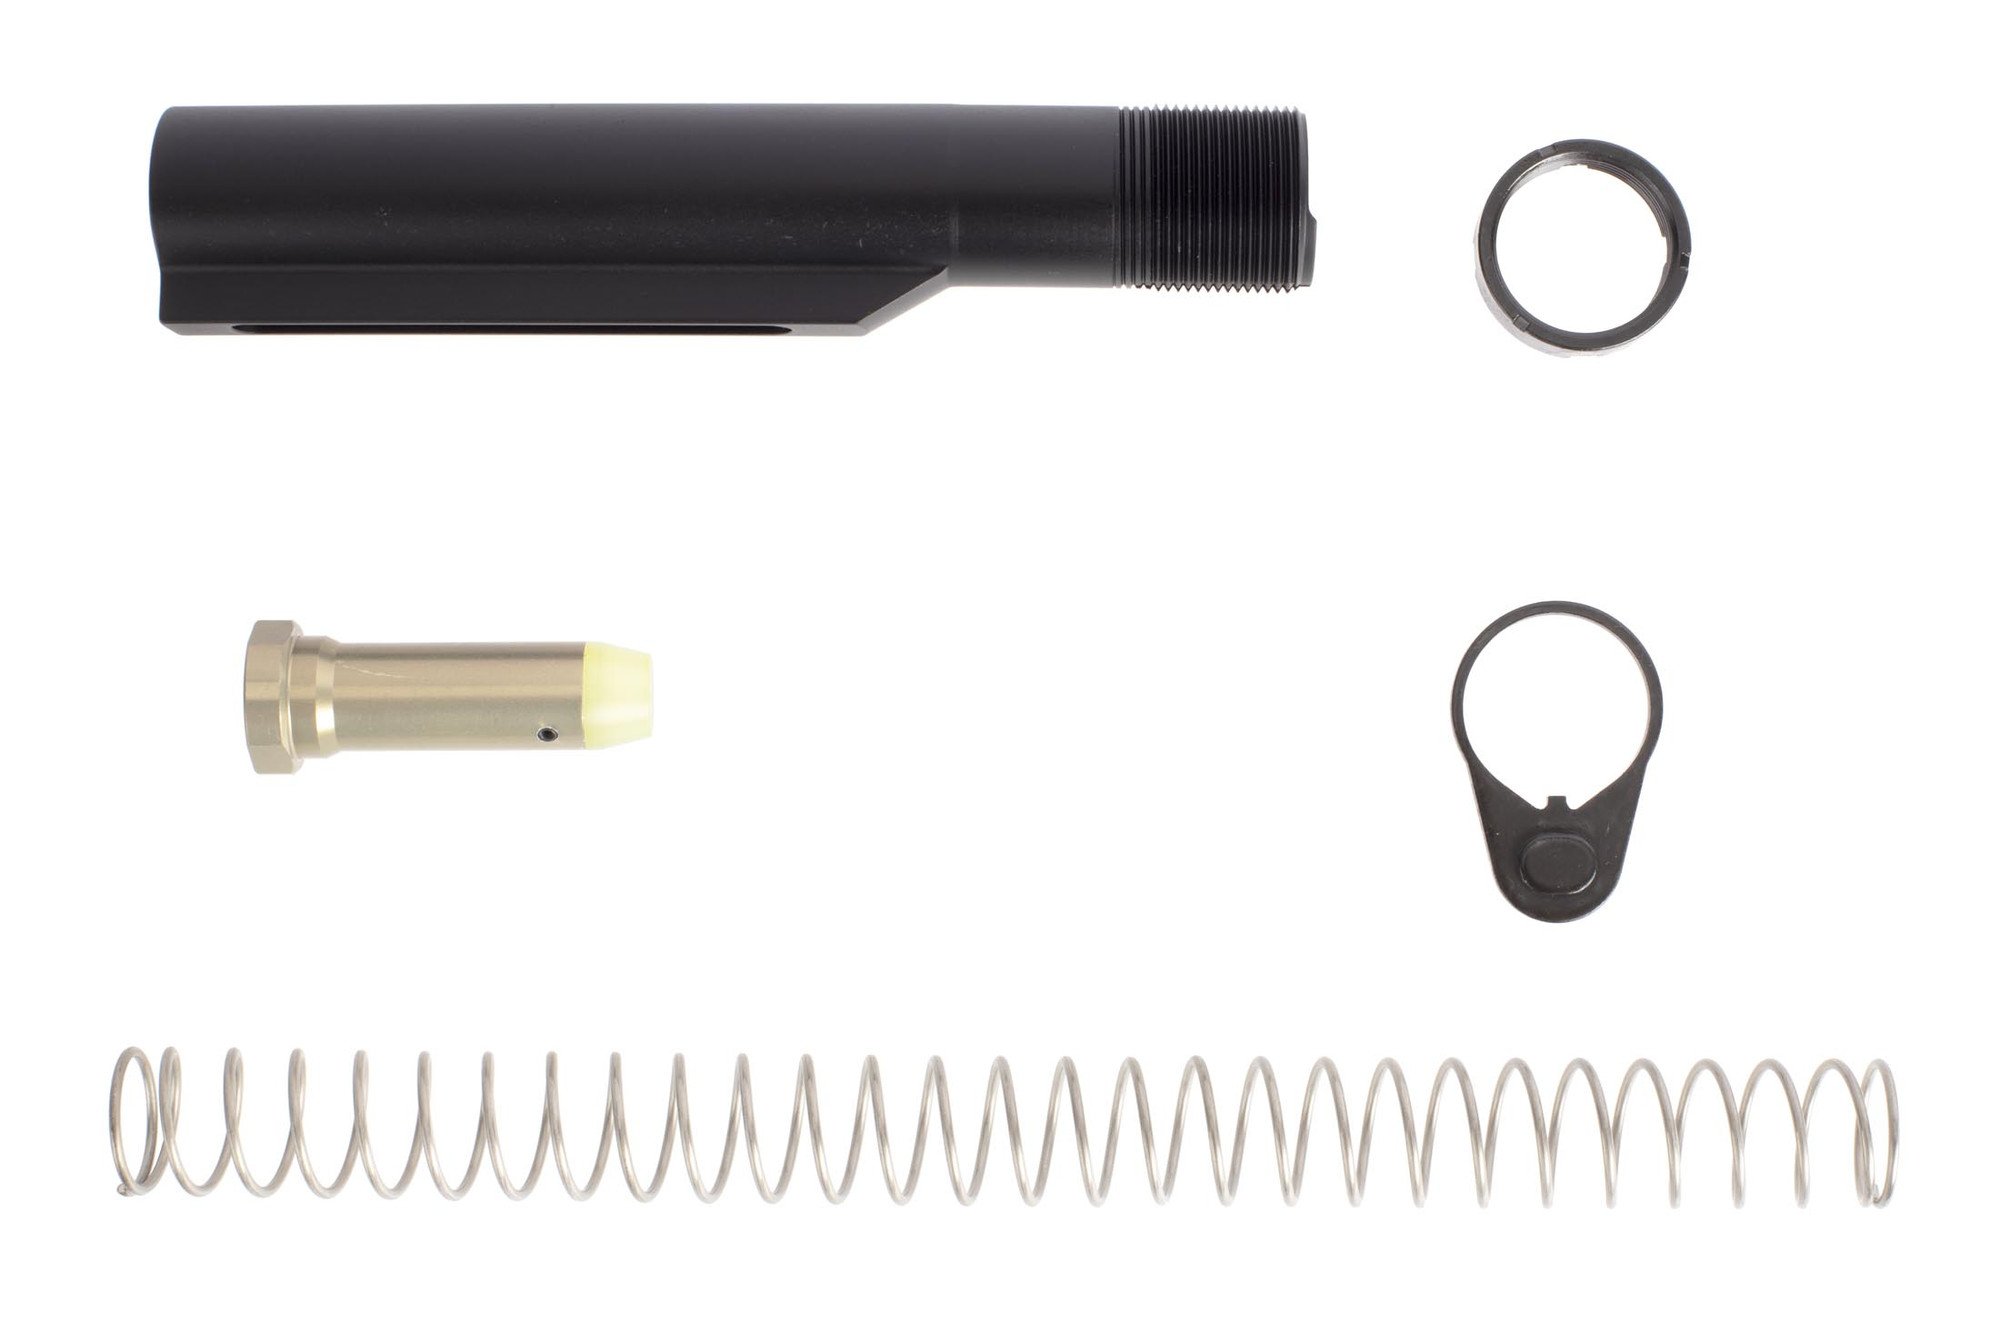 Anderson Manufacturing Stock Hardware Kit - MIL-SPEC .308 - $49.99